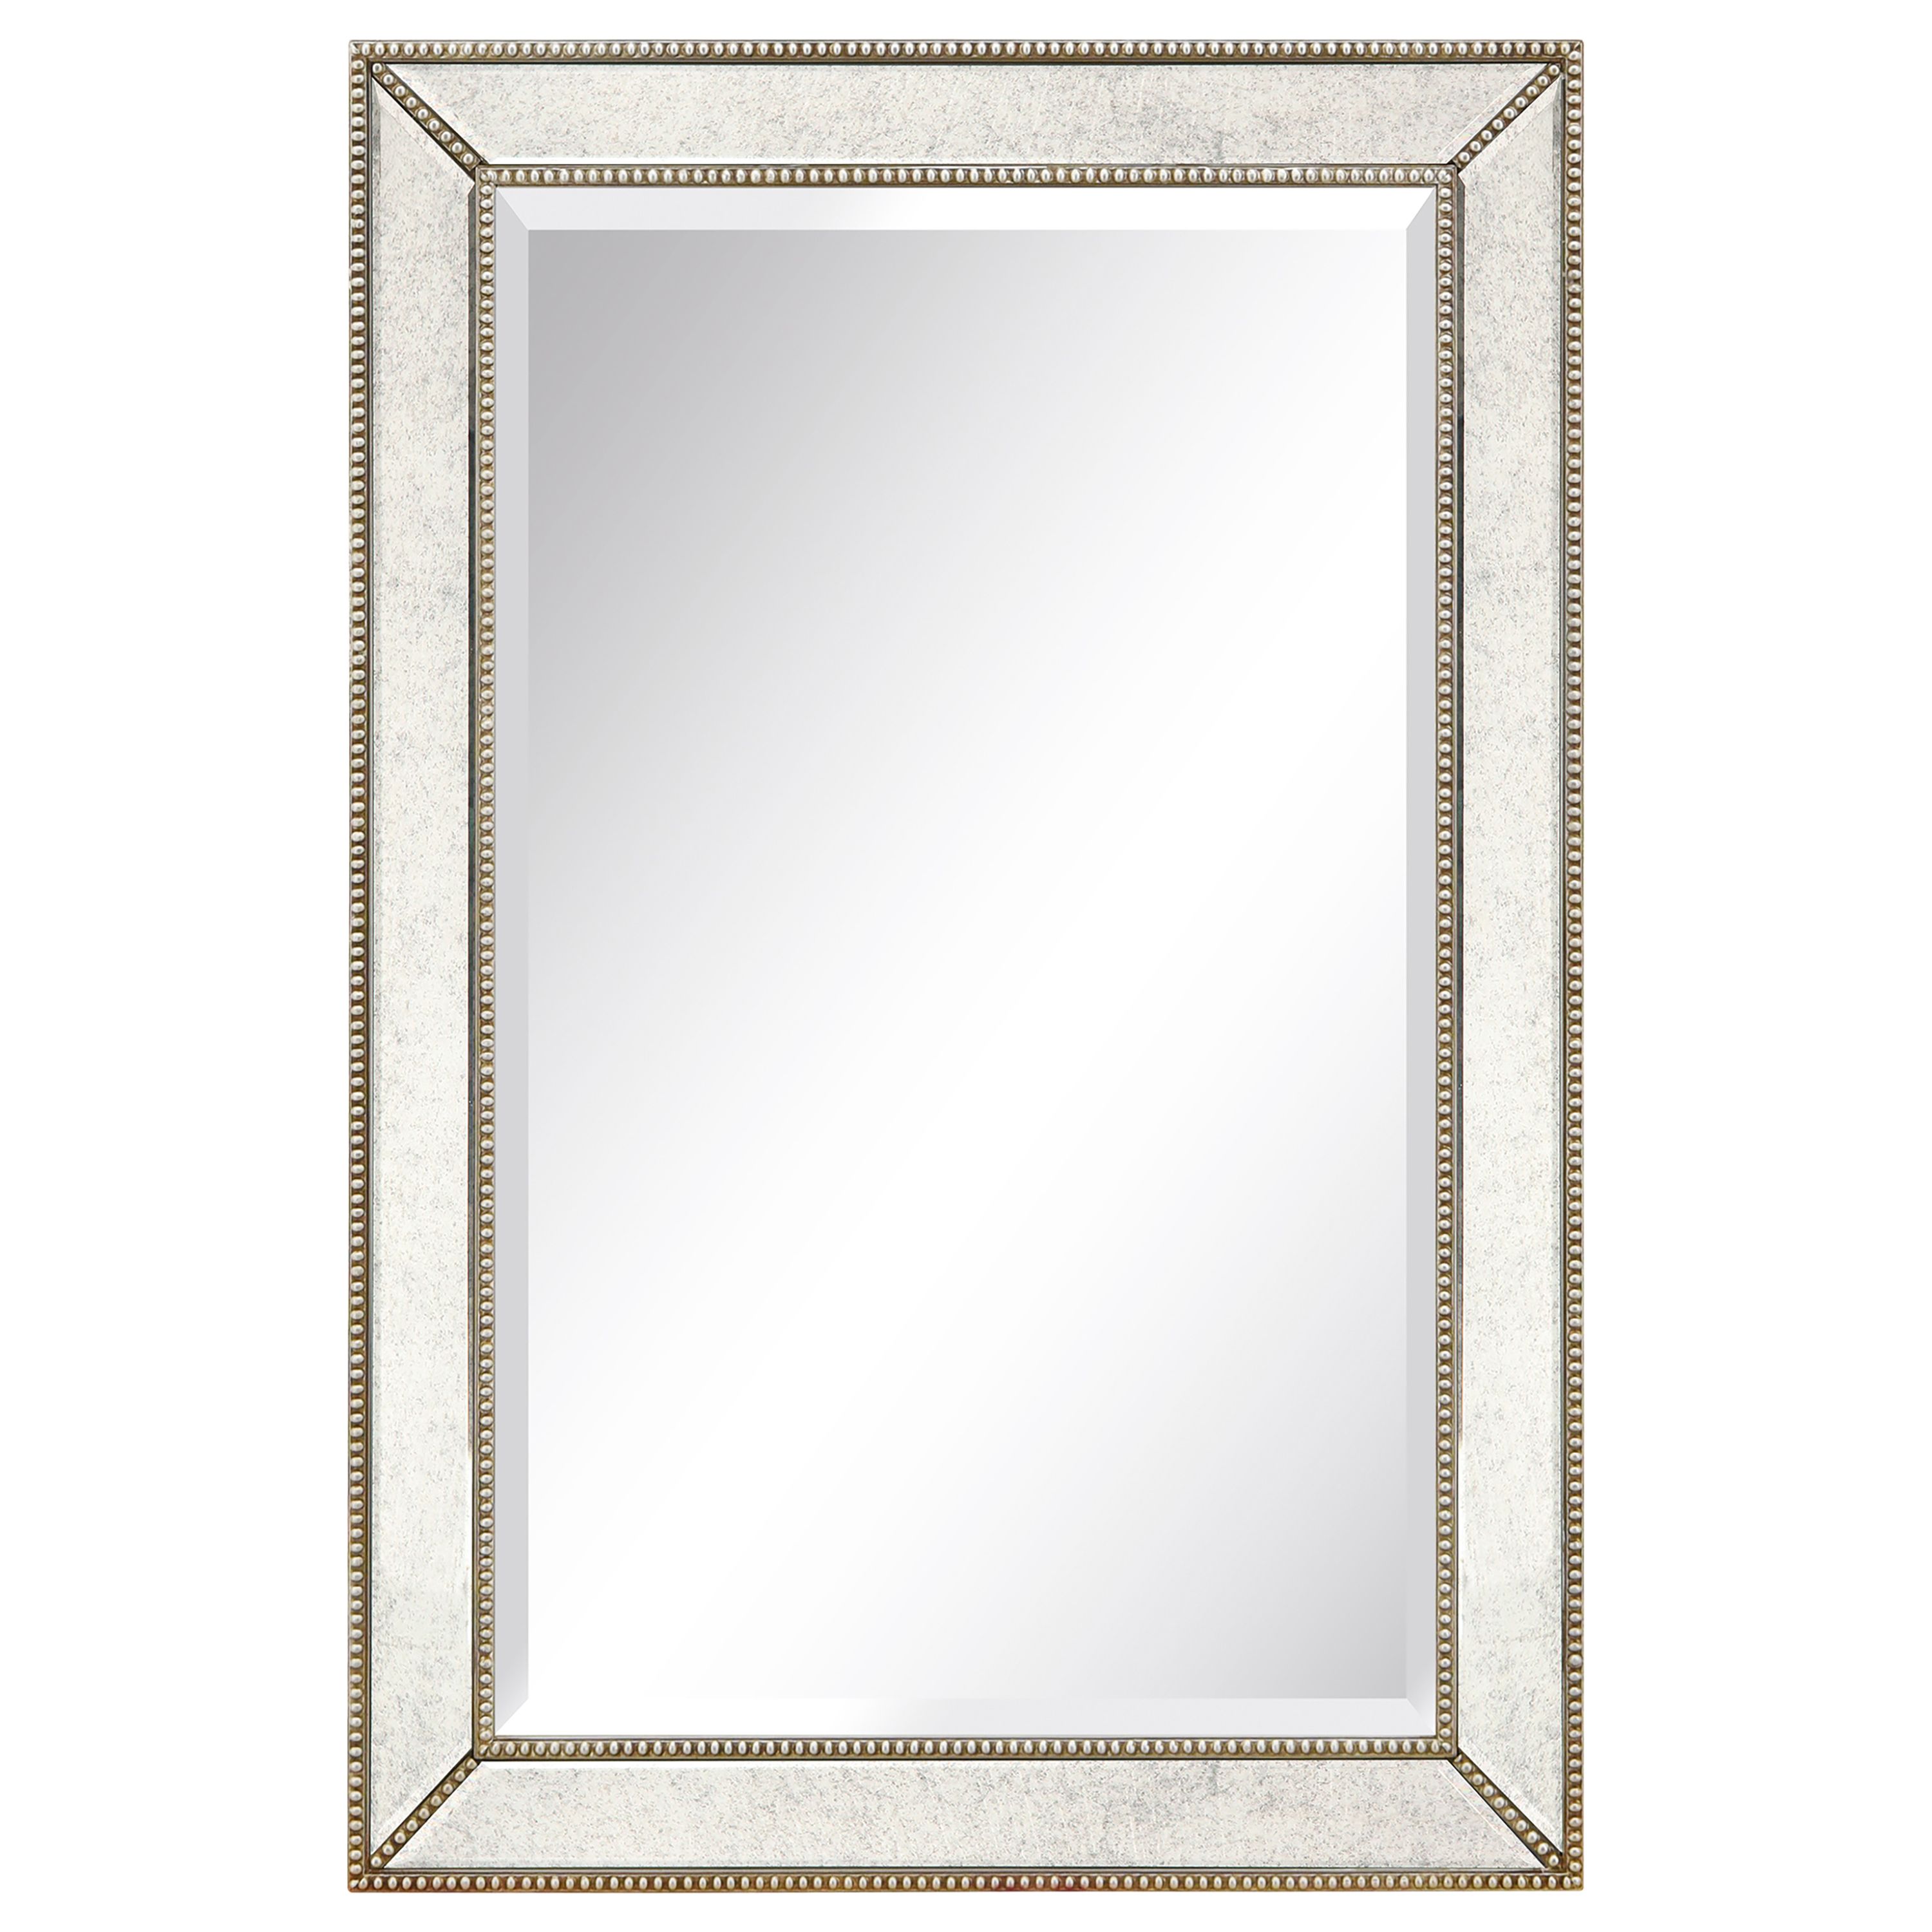 Mom-20210anp-2436 24 X 36 In. Solid Wood Frame Covered Wall Mirror With Beveled Antique Mirror Panels - 1 In. Beveled Edge